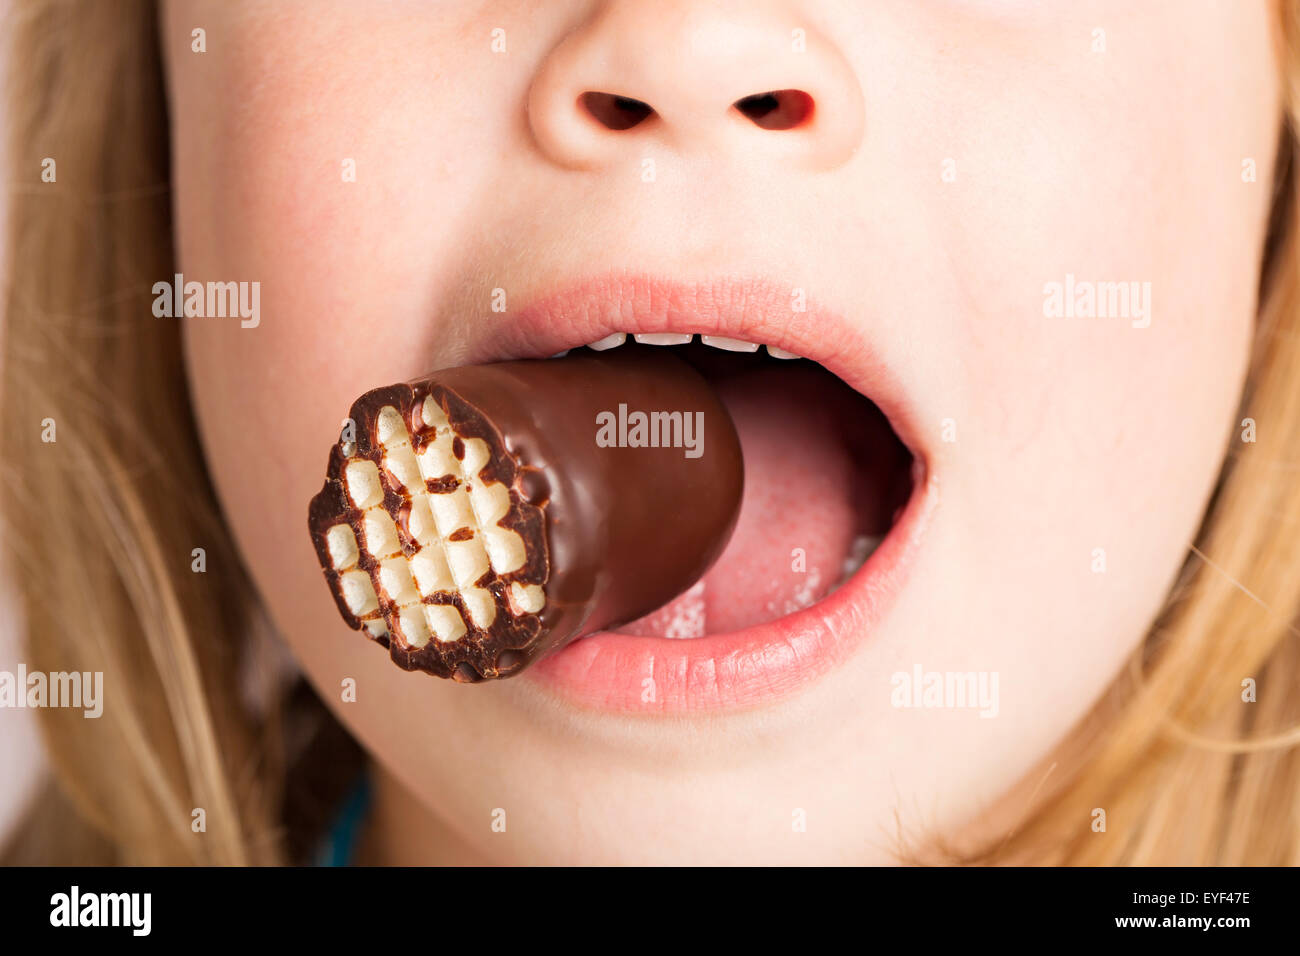 Chocolate marshmallow in mouth Stock Photo